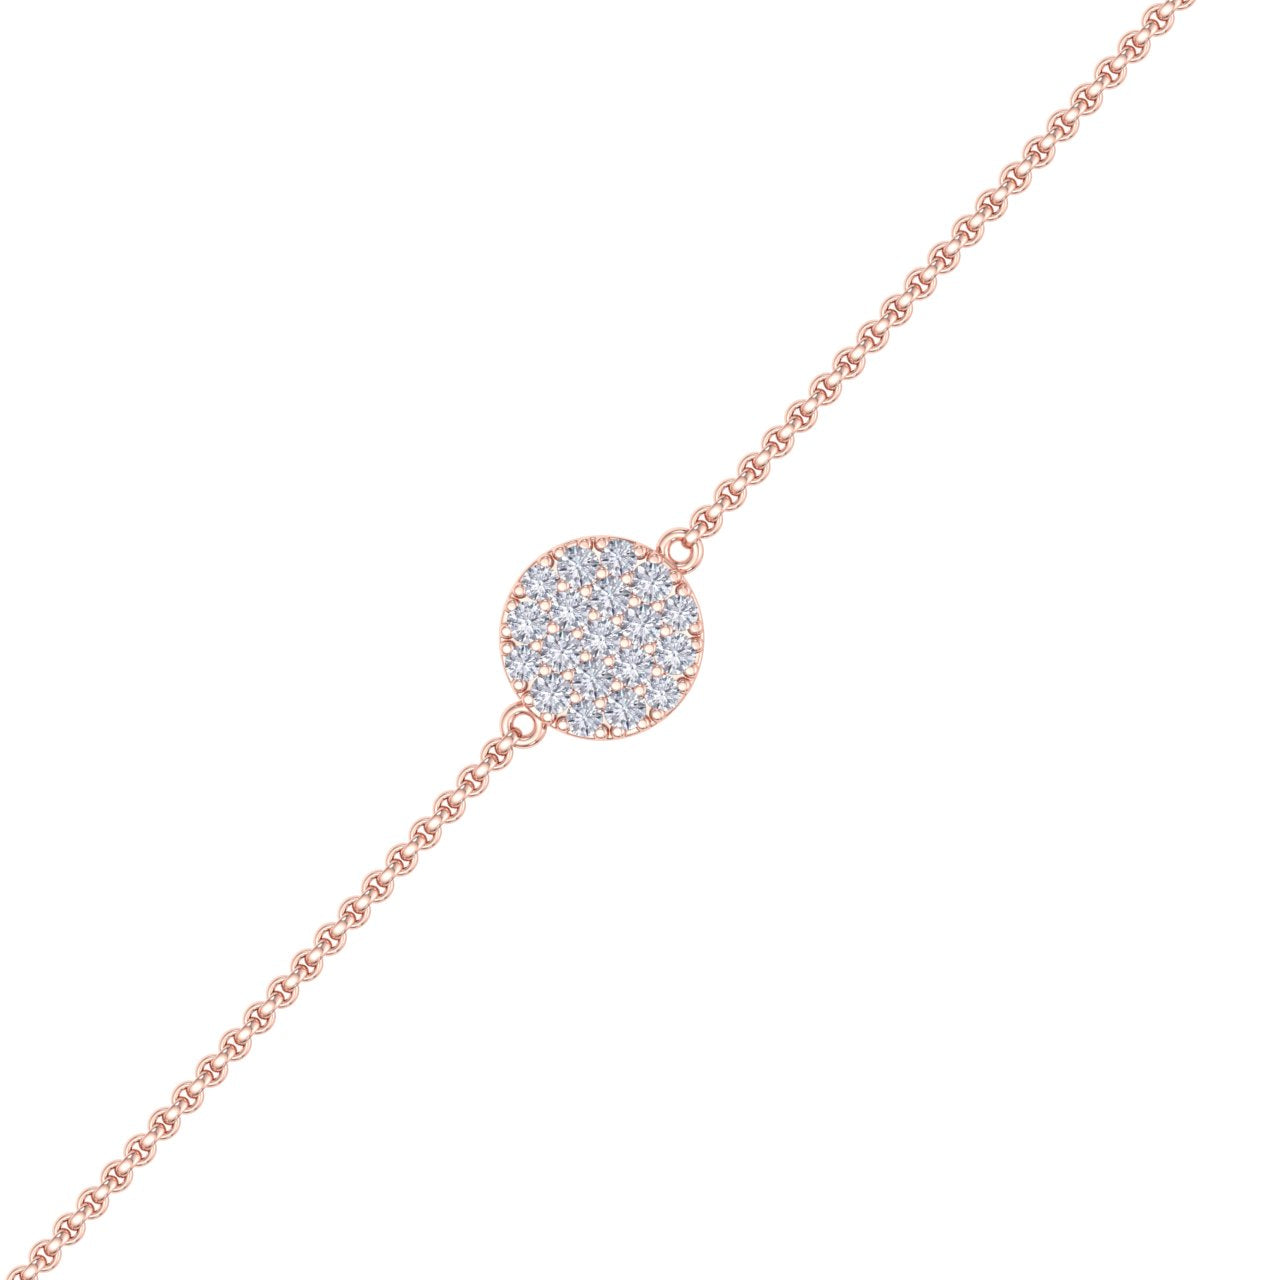 Circle bracelet in yellow gold with white diamonds of 0.50 ct in weight